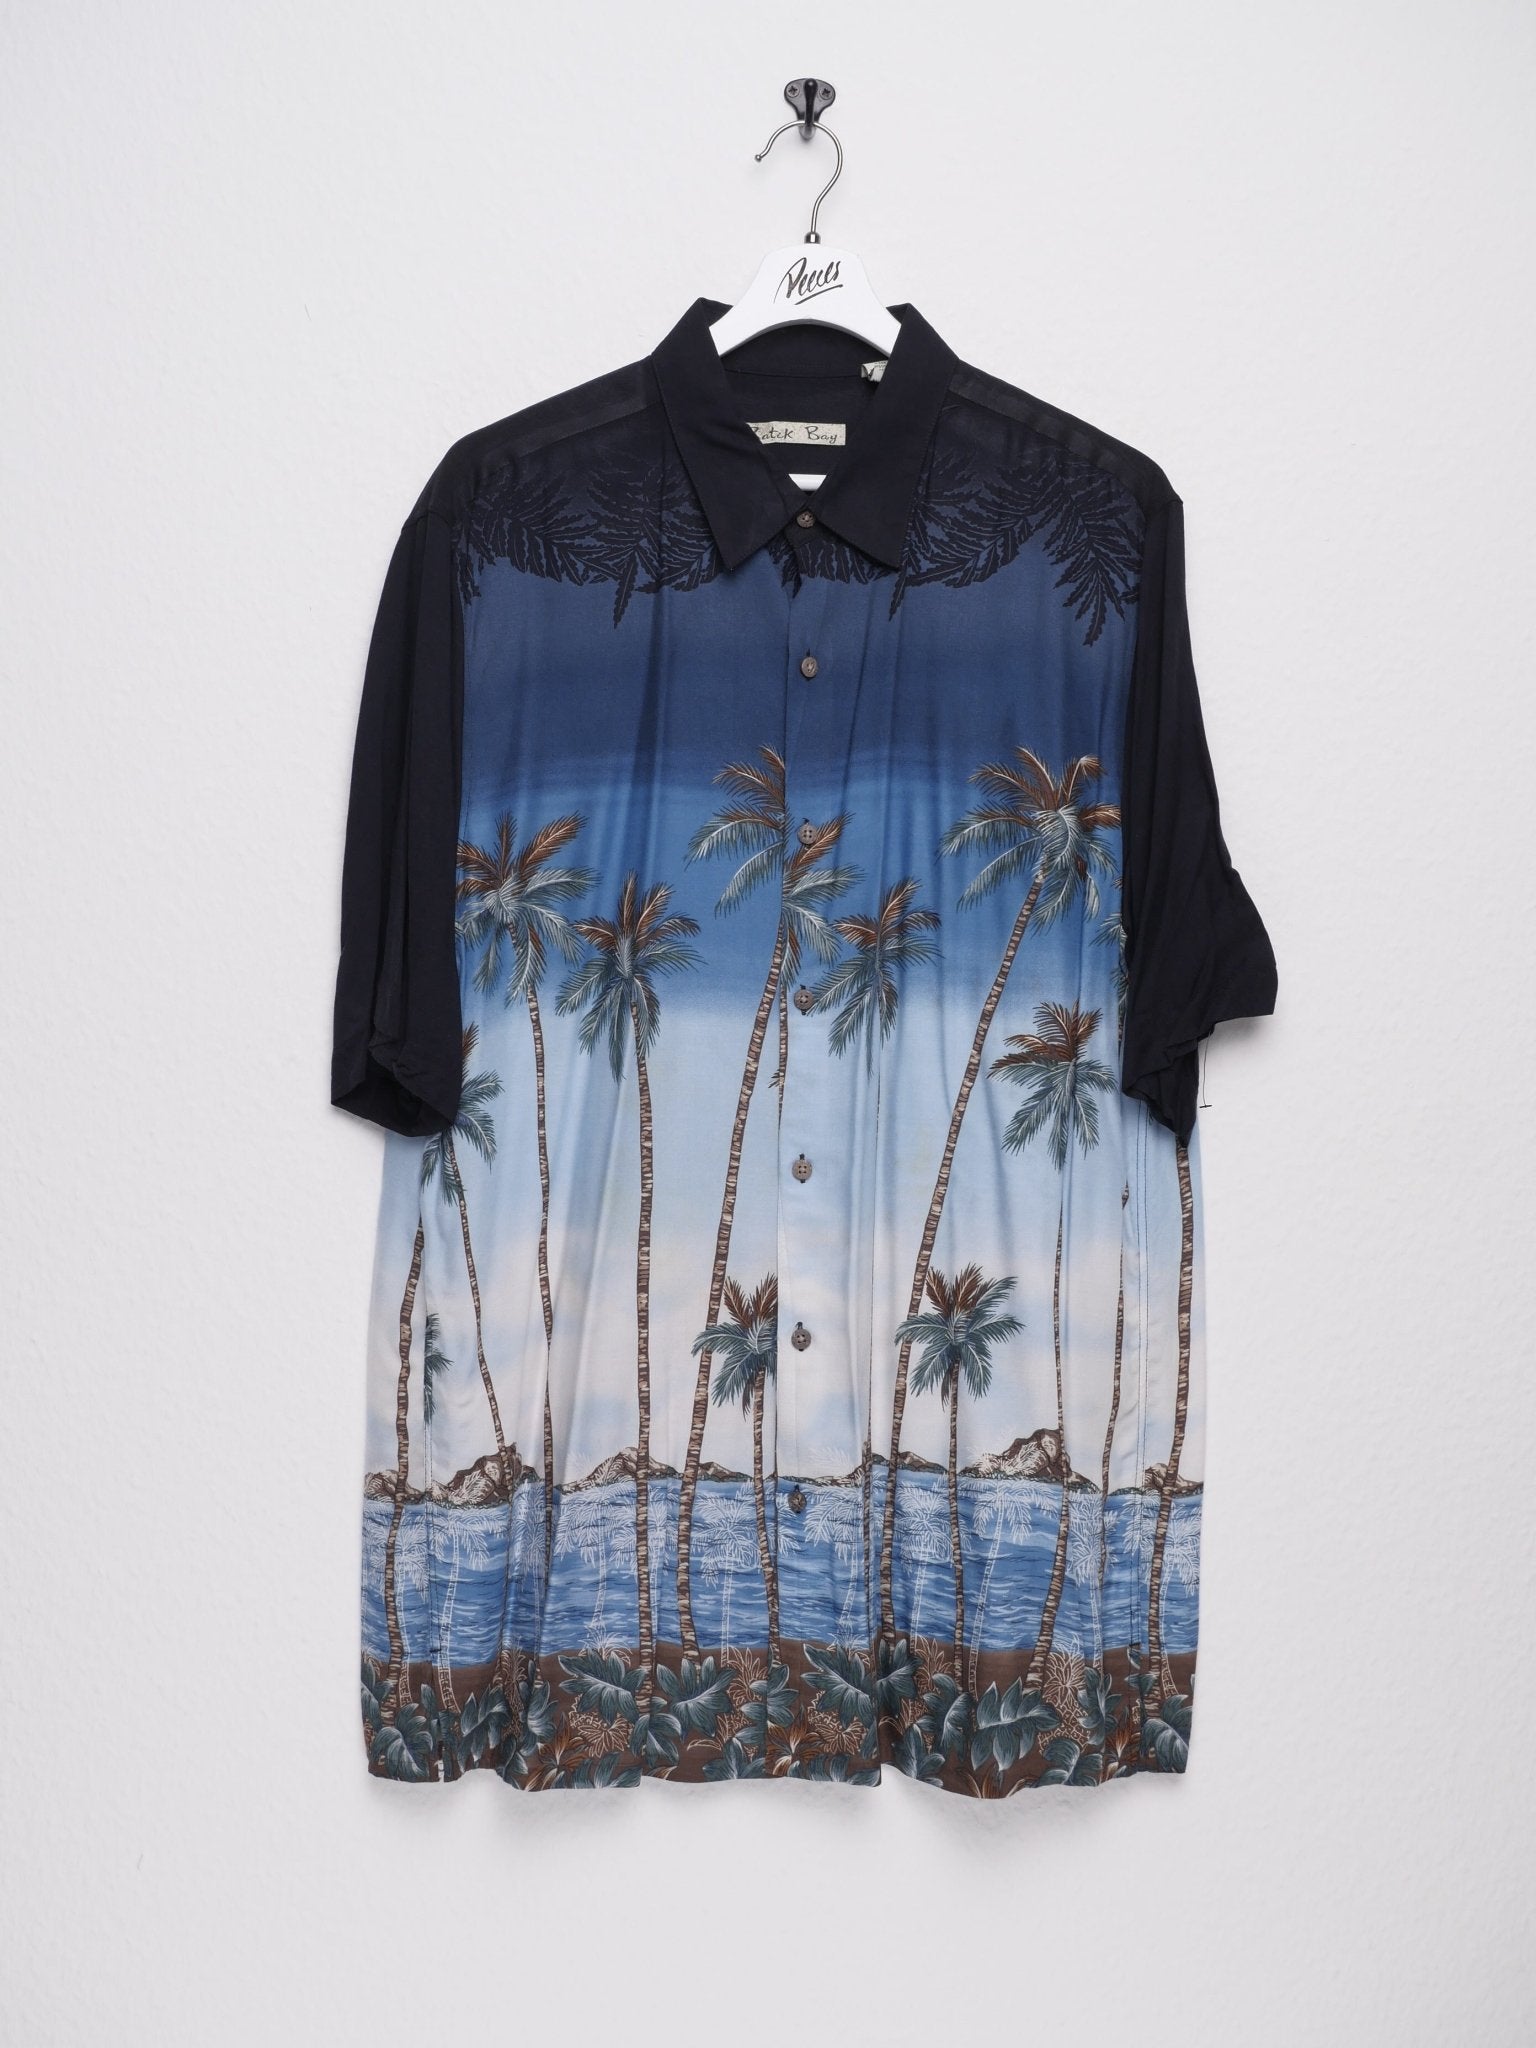 'Palms' printed Graphic multicolored S/S Hemd - Peeces